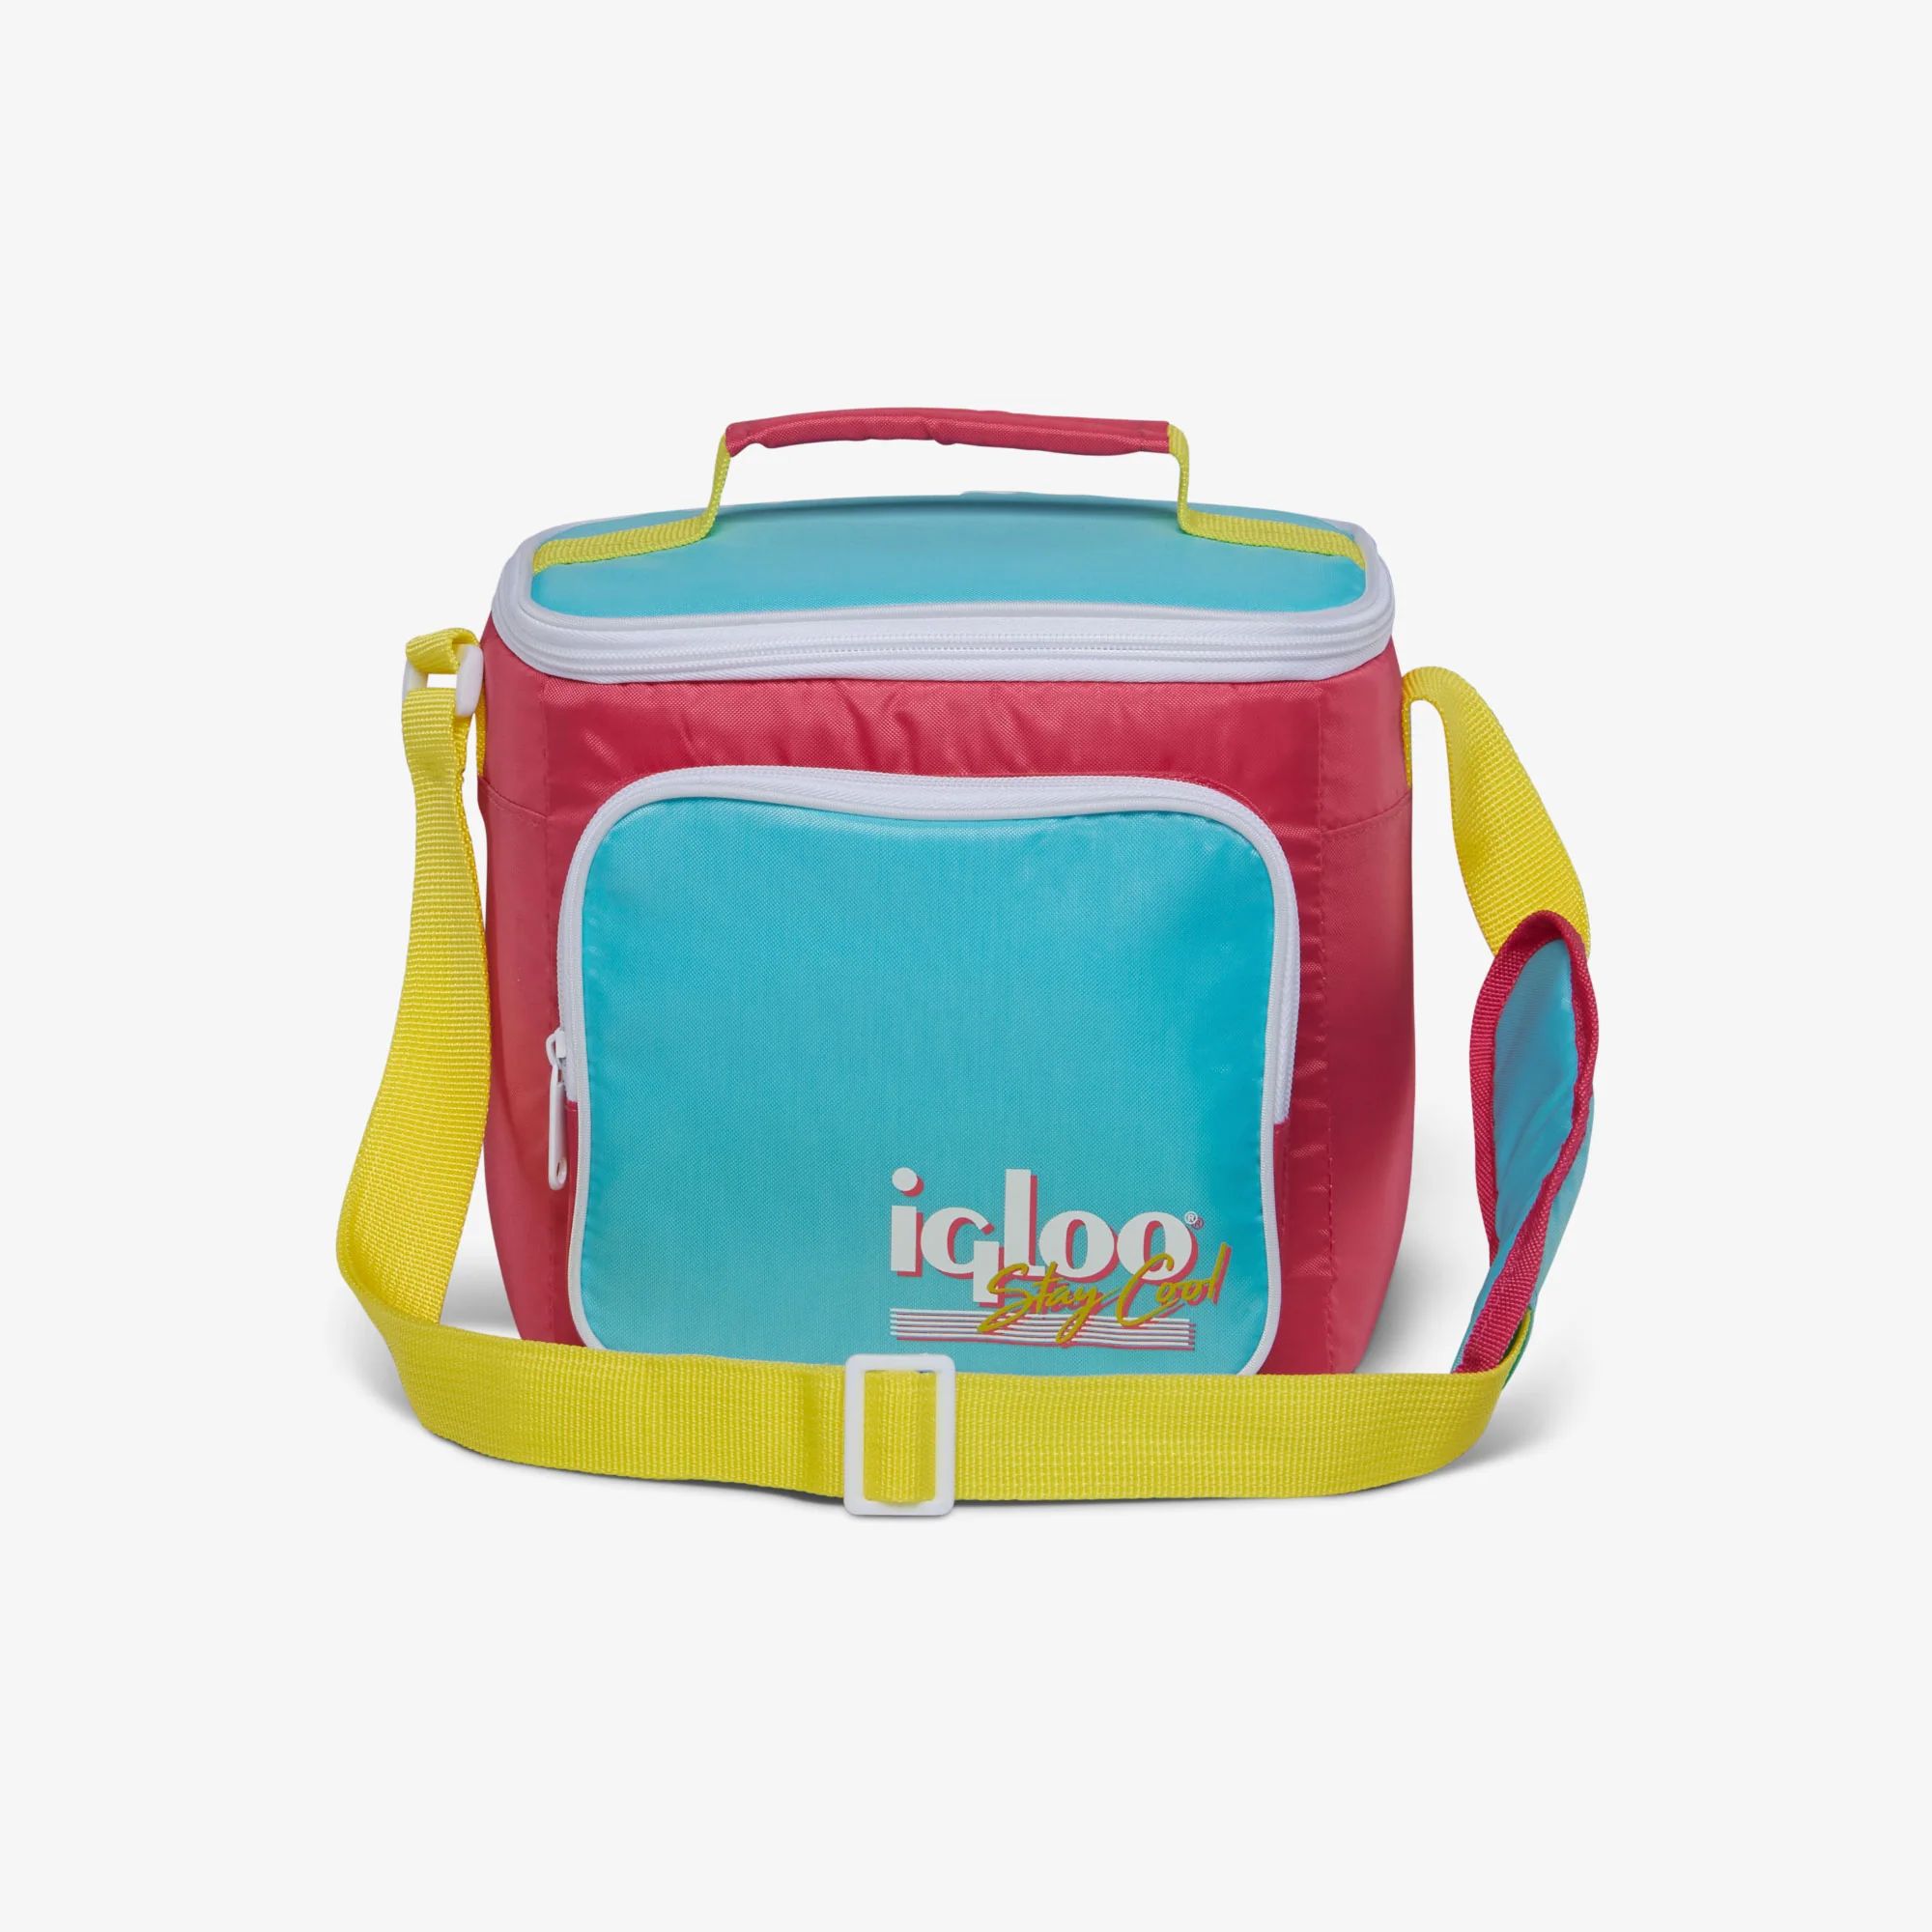 Retro Square Lunch Bag | Igloo Coolers